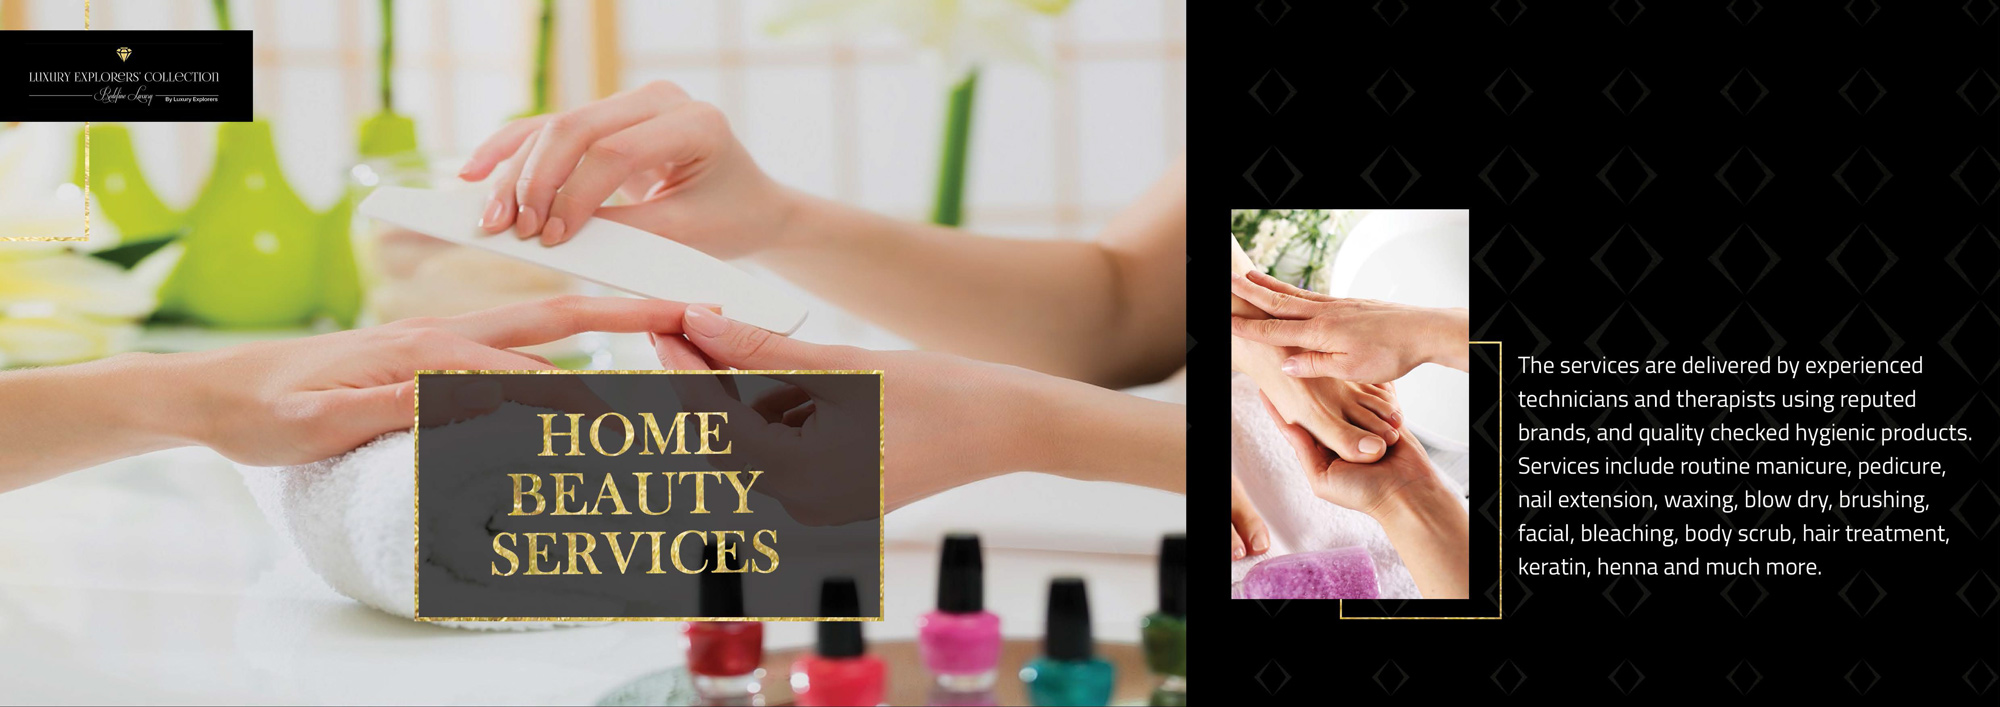 Home-Beauty-Services